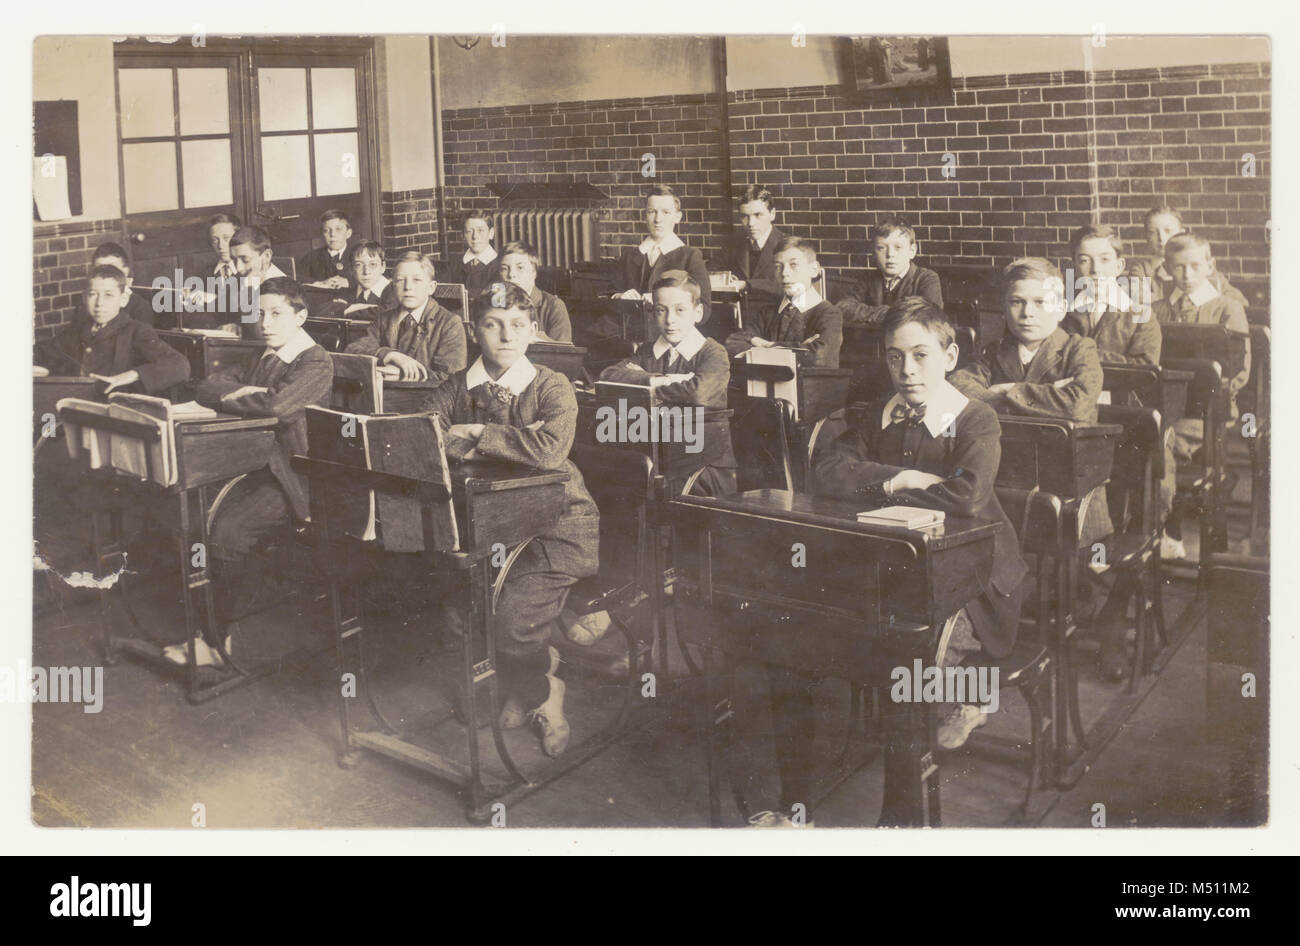 Old Fashioned One Room School High Resolution Stock Photography and ...